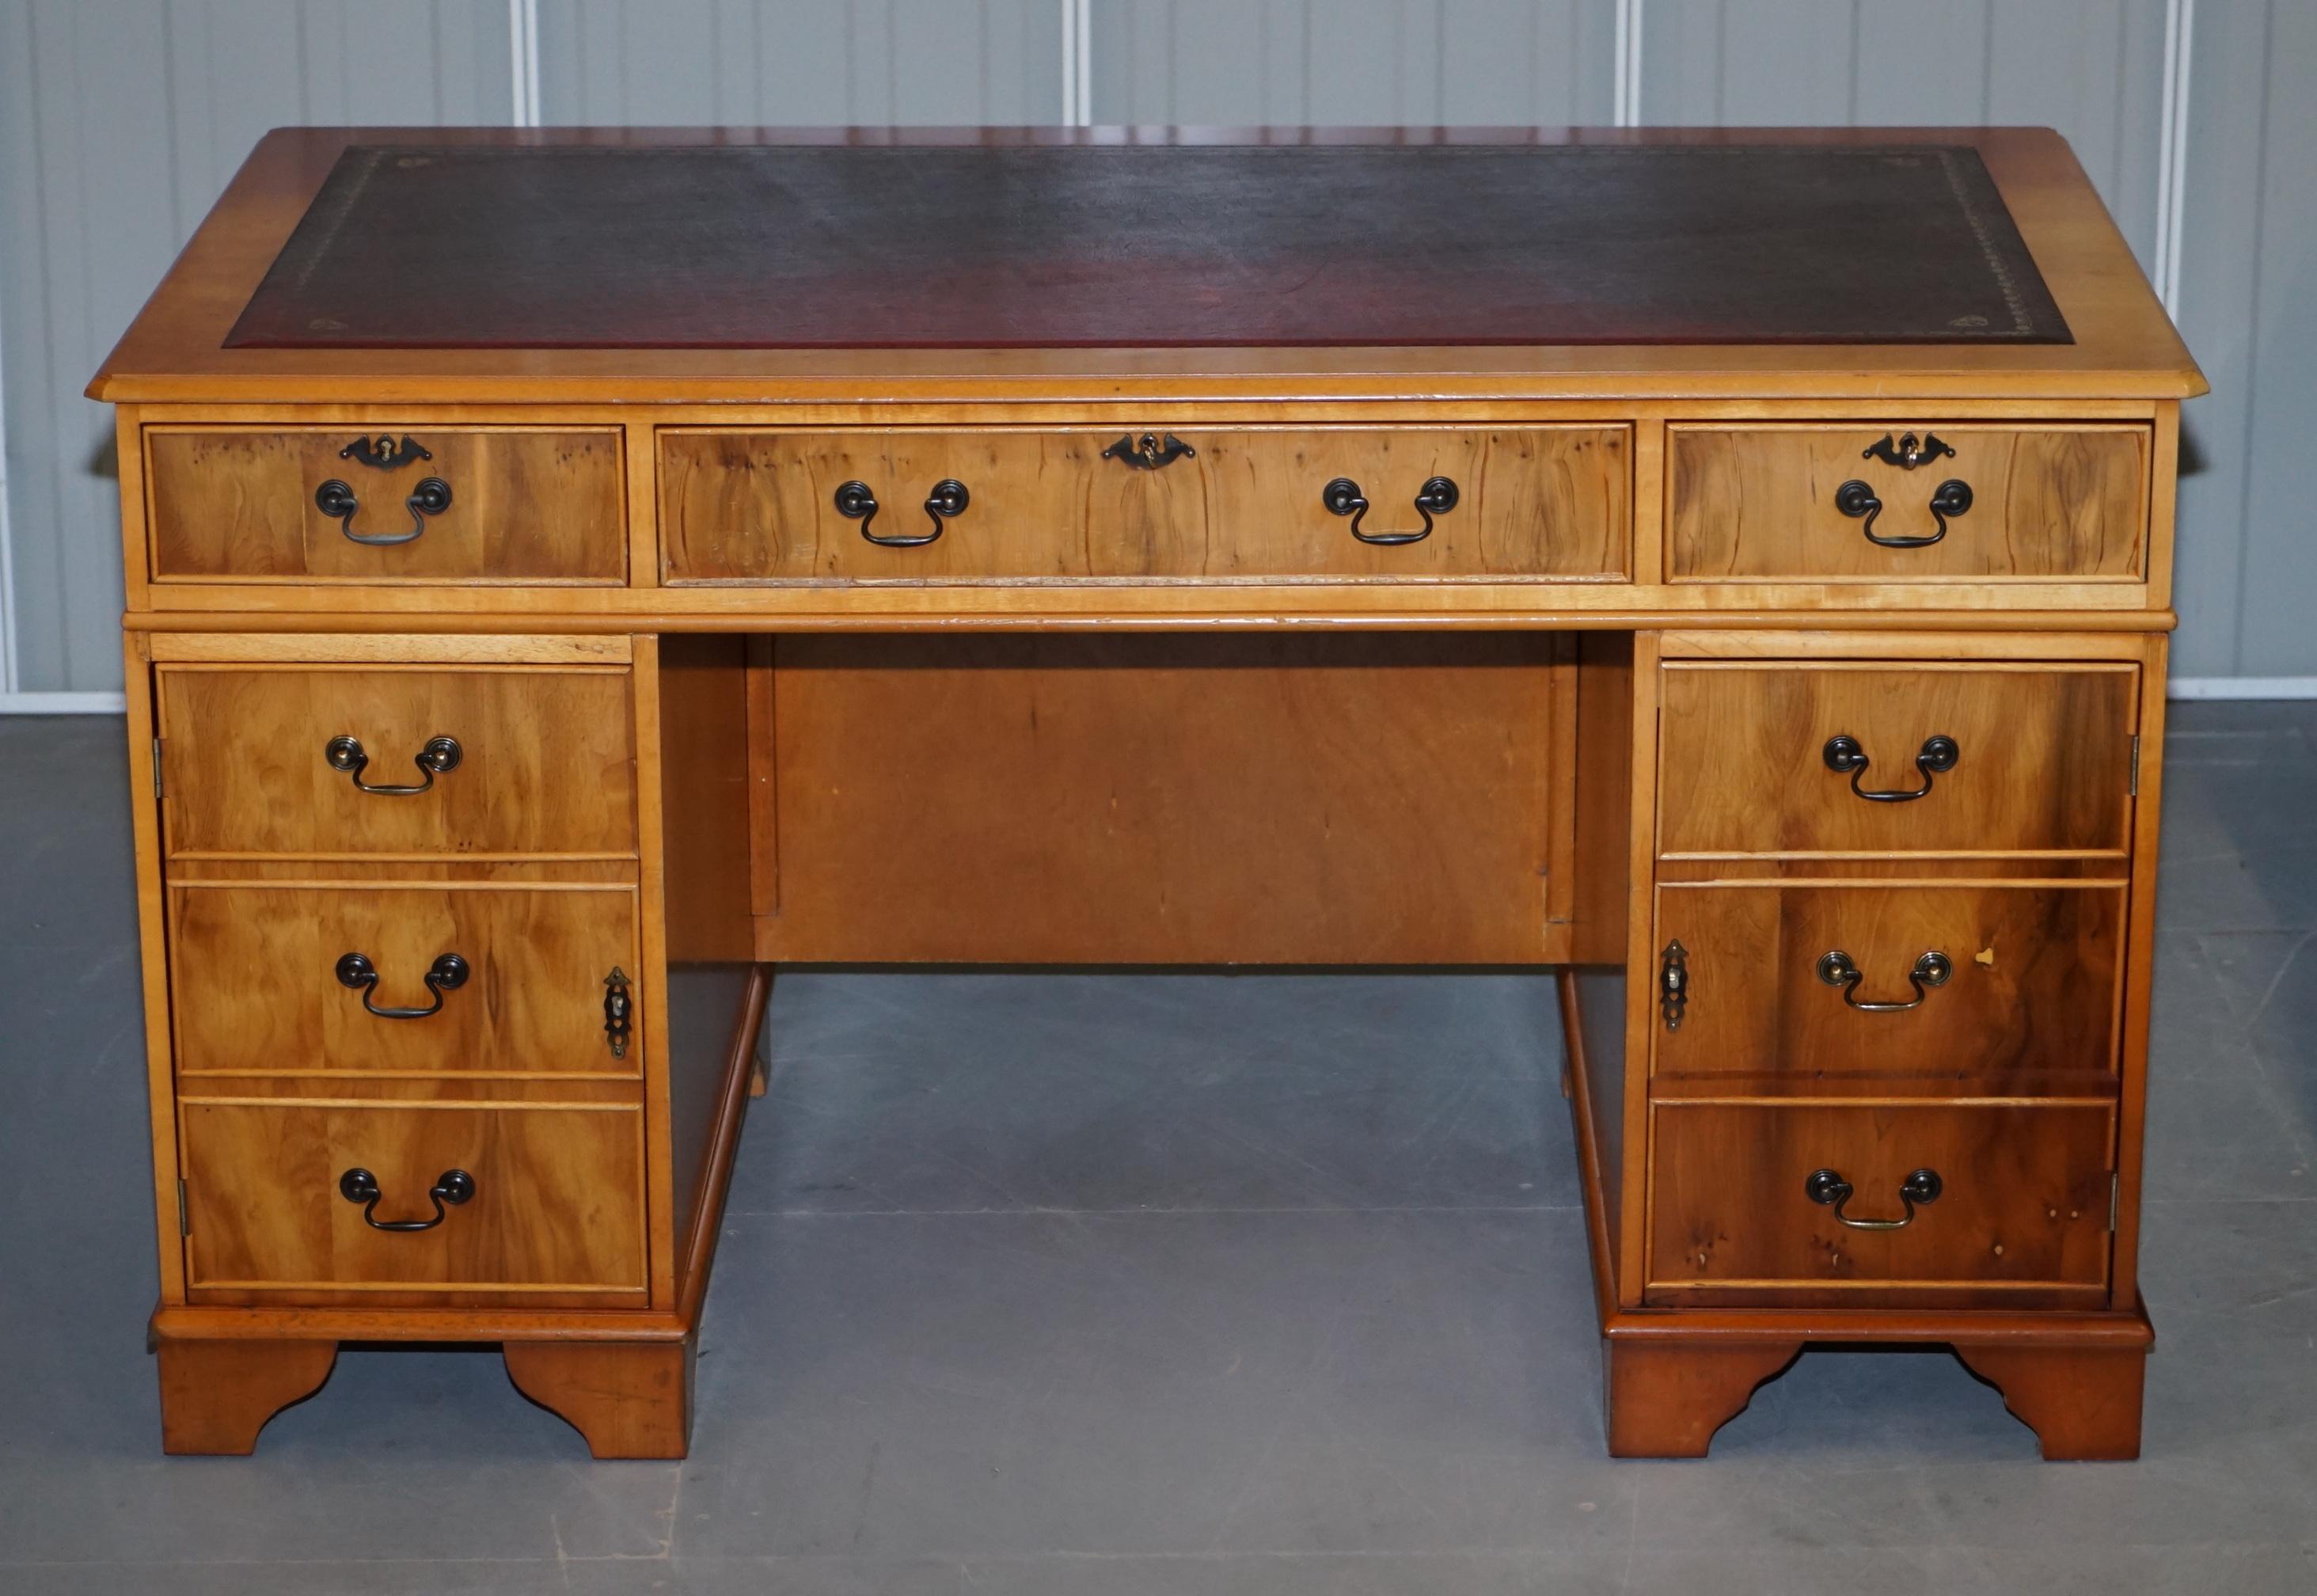 We are delighted to offer for sale this vintage Flamed & Burr Satinwood twin pedestal partner desk made with Oxblood leather writing surface and panelled back 

This is a good looking, well made and decorative piece, the cuts of timber are lovely